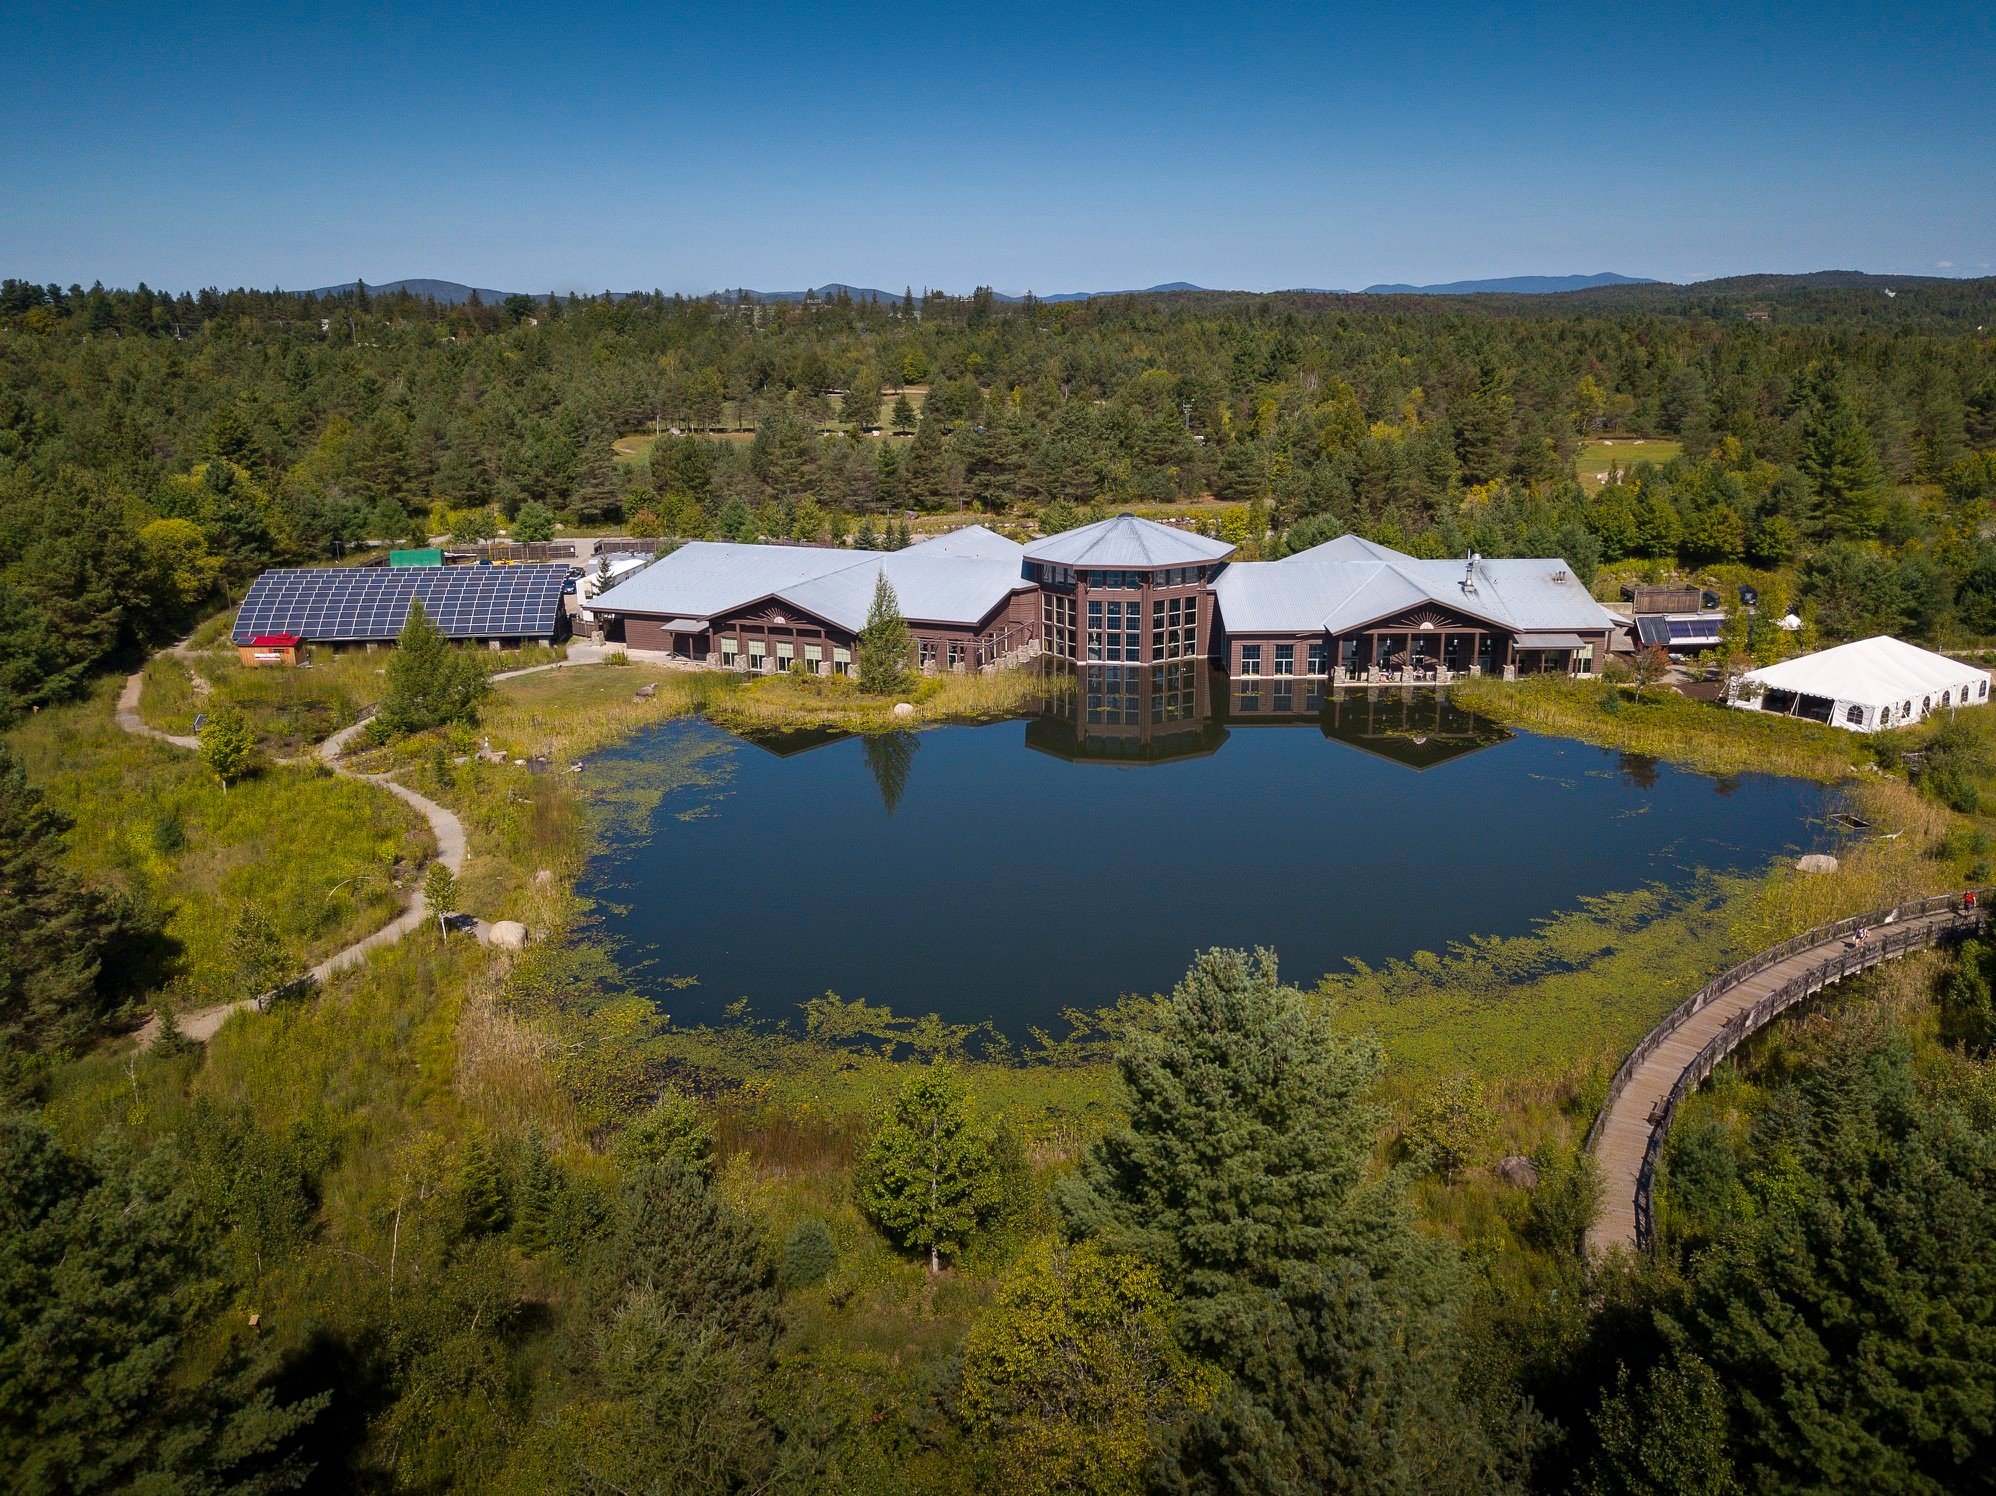 DO_MUSEUM ARTS CULTURE-TRI-LAKES & HIGH PEAKS-TUPPER LAKE-THE WILD CENTER-AERIAL VIEW.jpeg